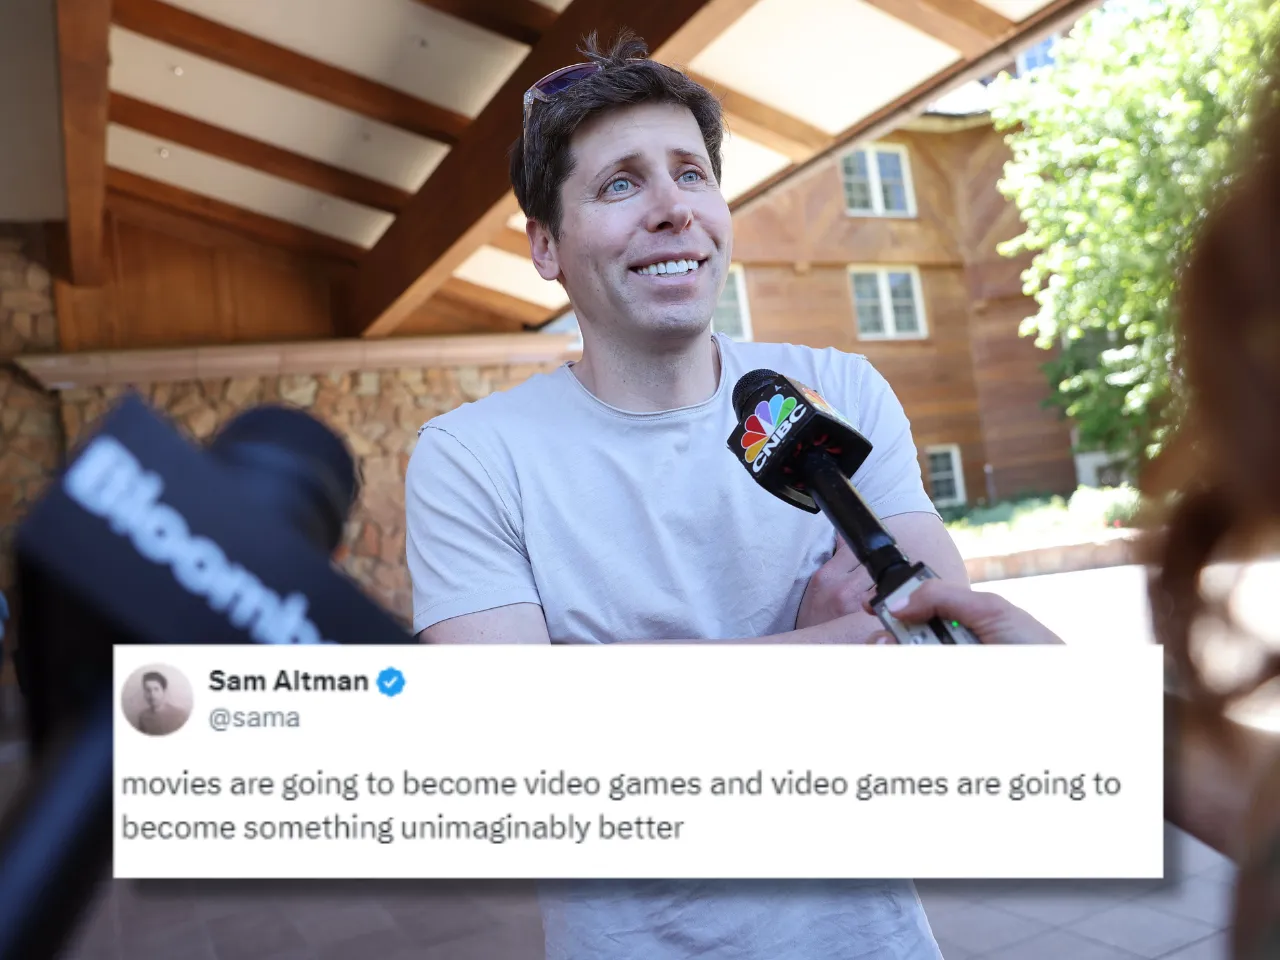 'Video games are going to become unimaginably better': Sam Altman on future of gaming